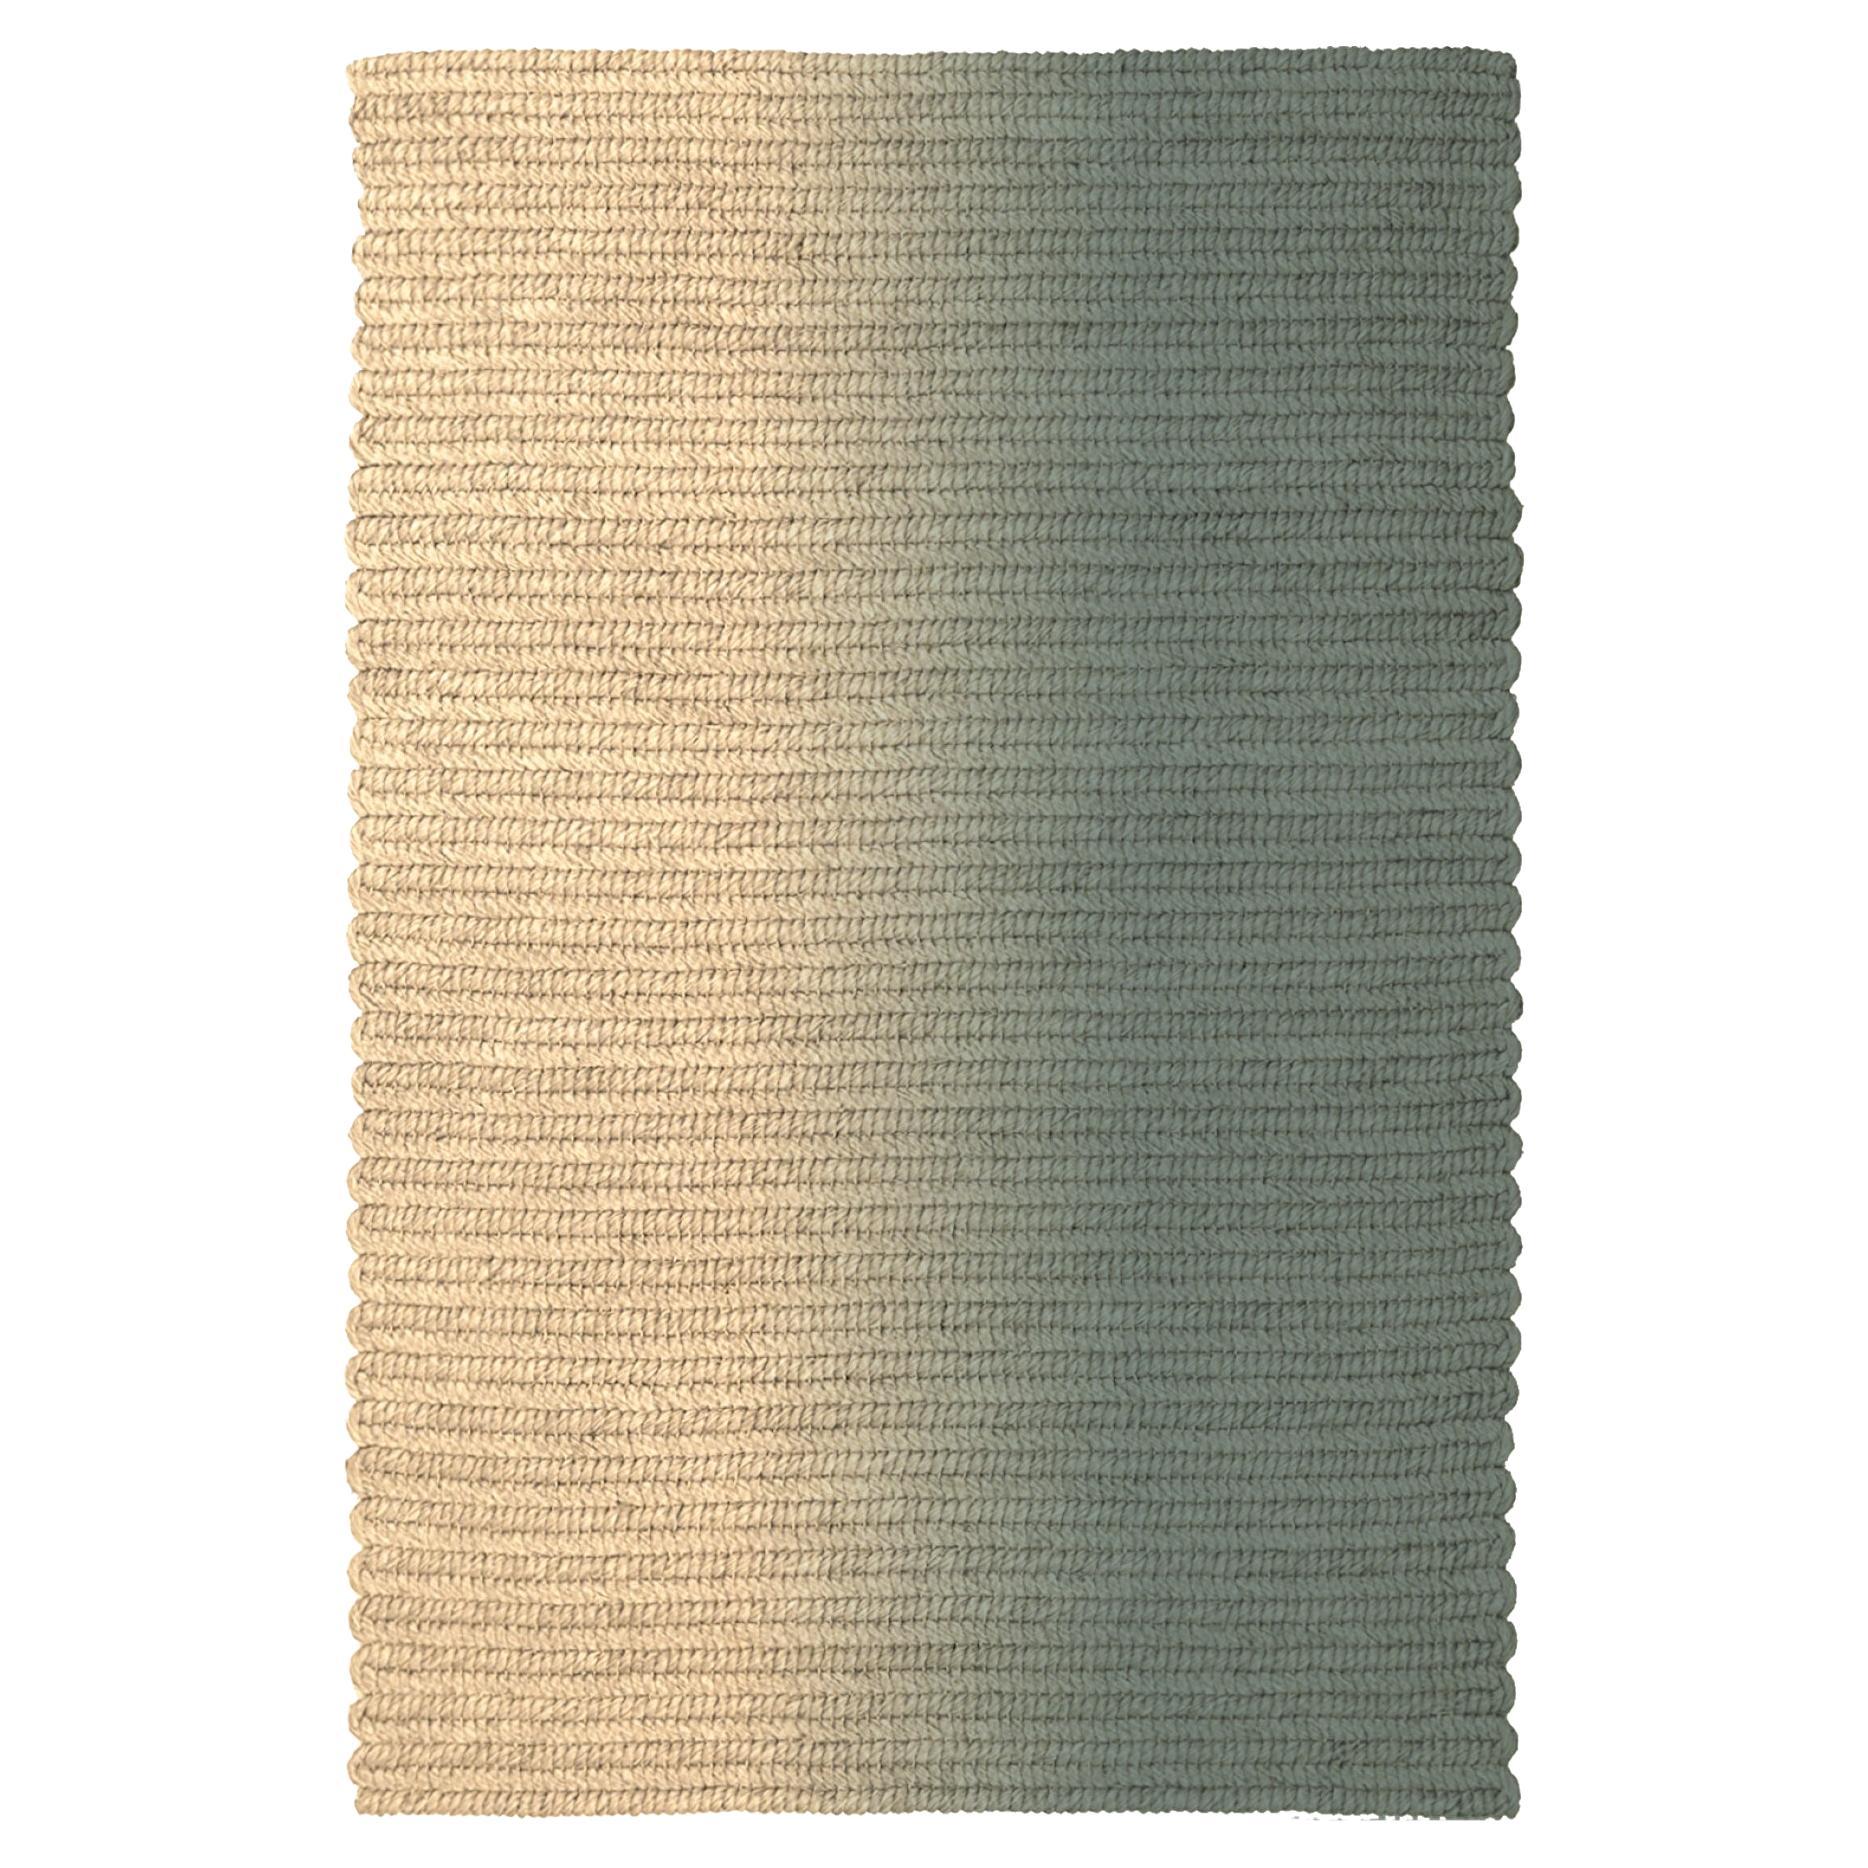 Claire Vos for Musett 'Switch' Abaca Indoor Rug in Caffe Latte, in 160 x 240 cm For Sale